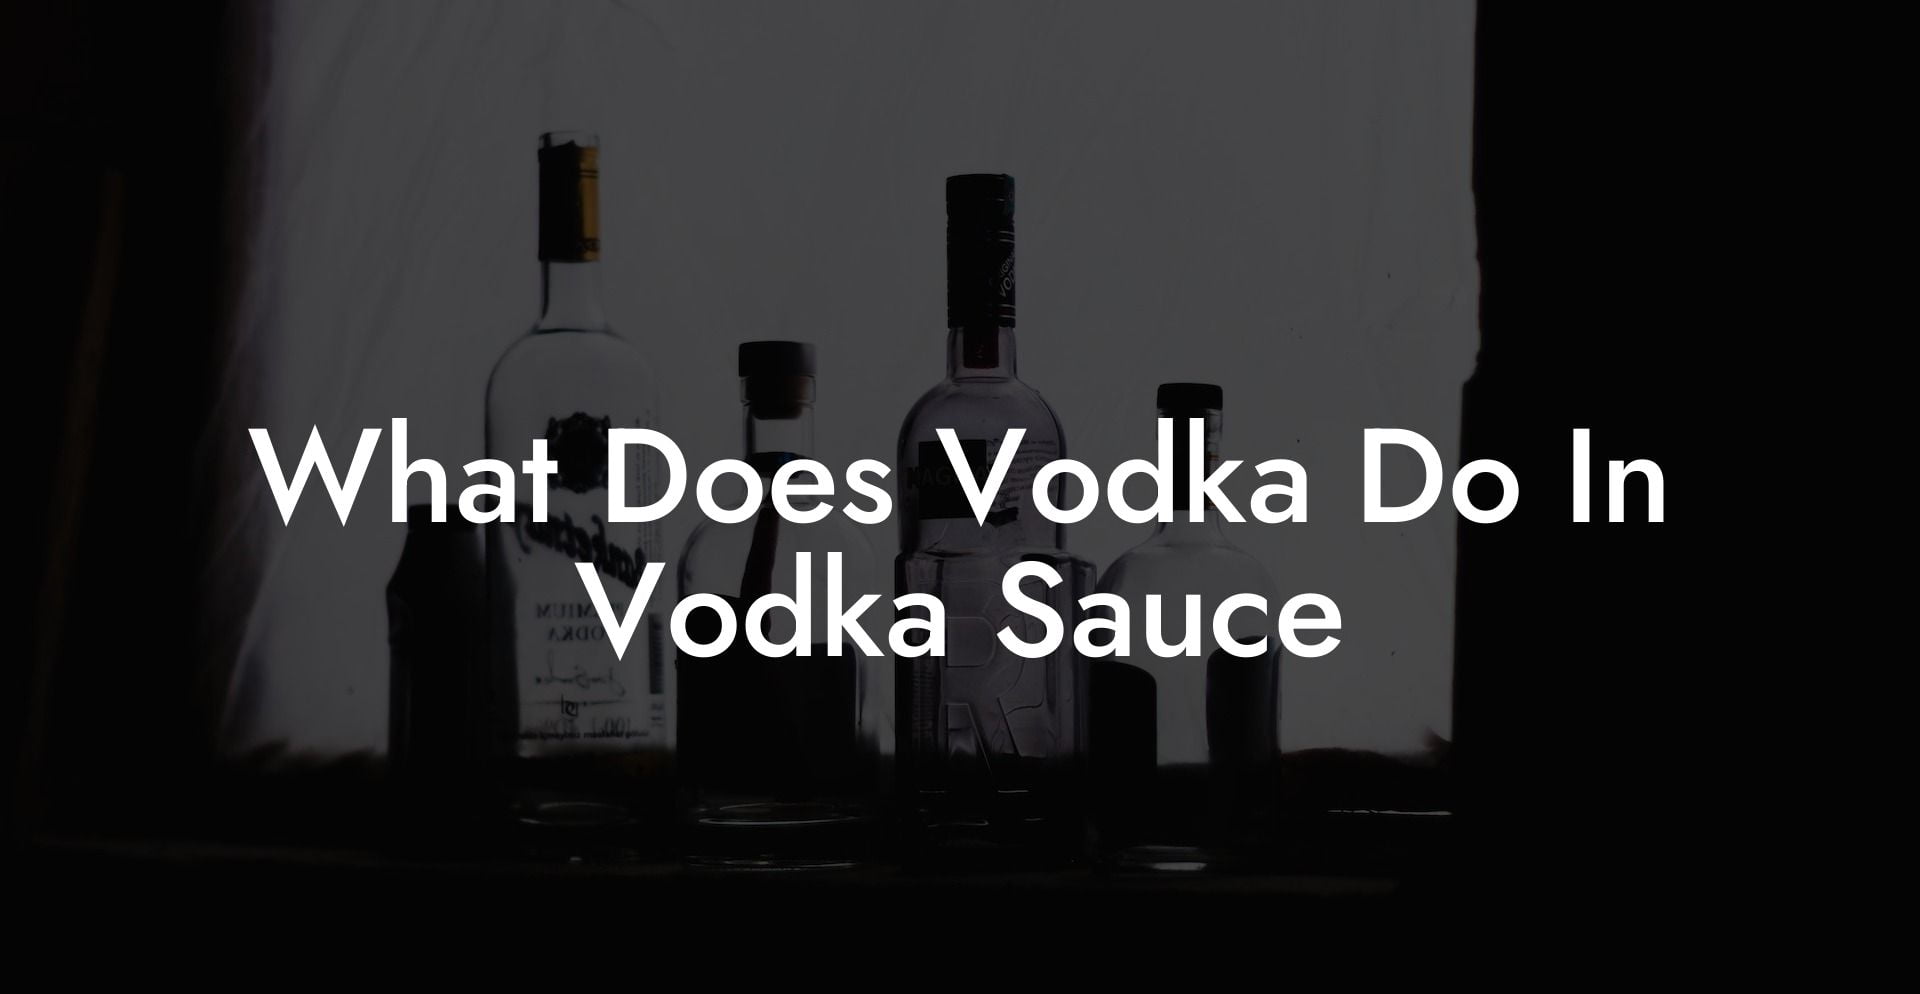 What Does Vodka Do In Vodka Sauce